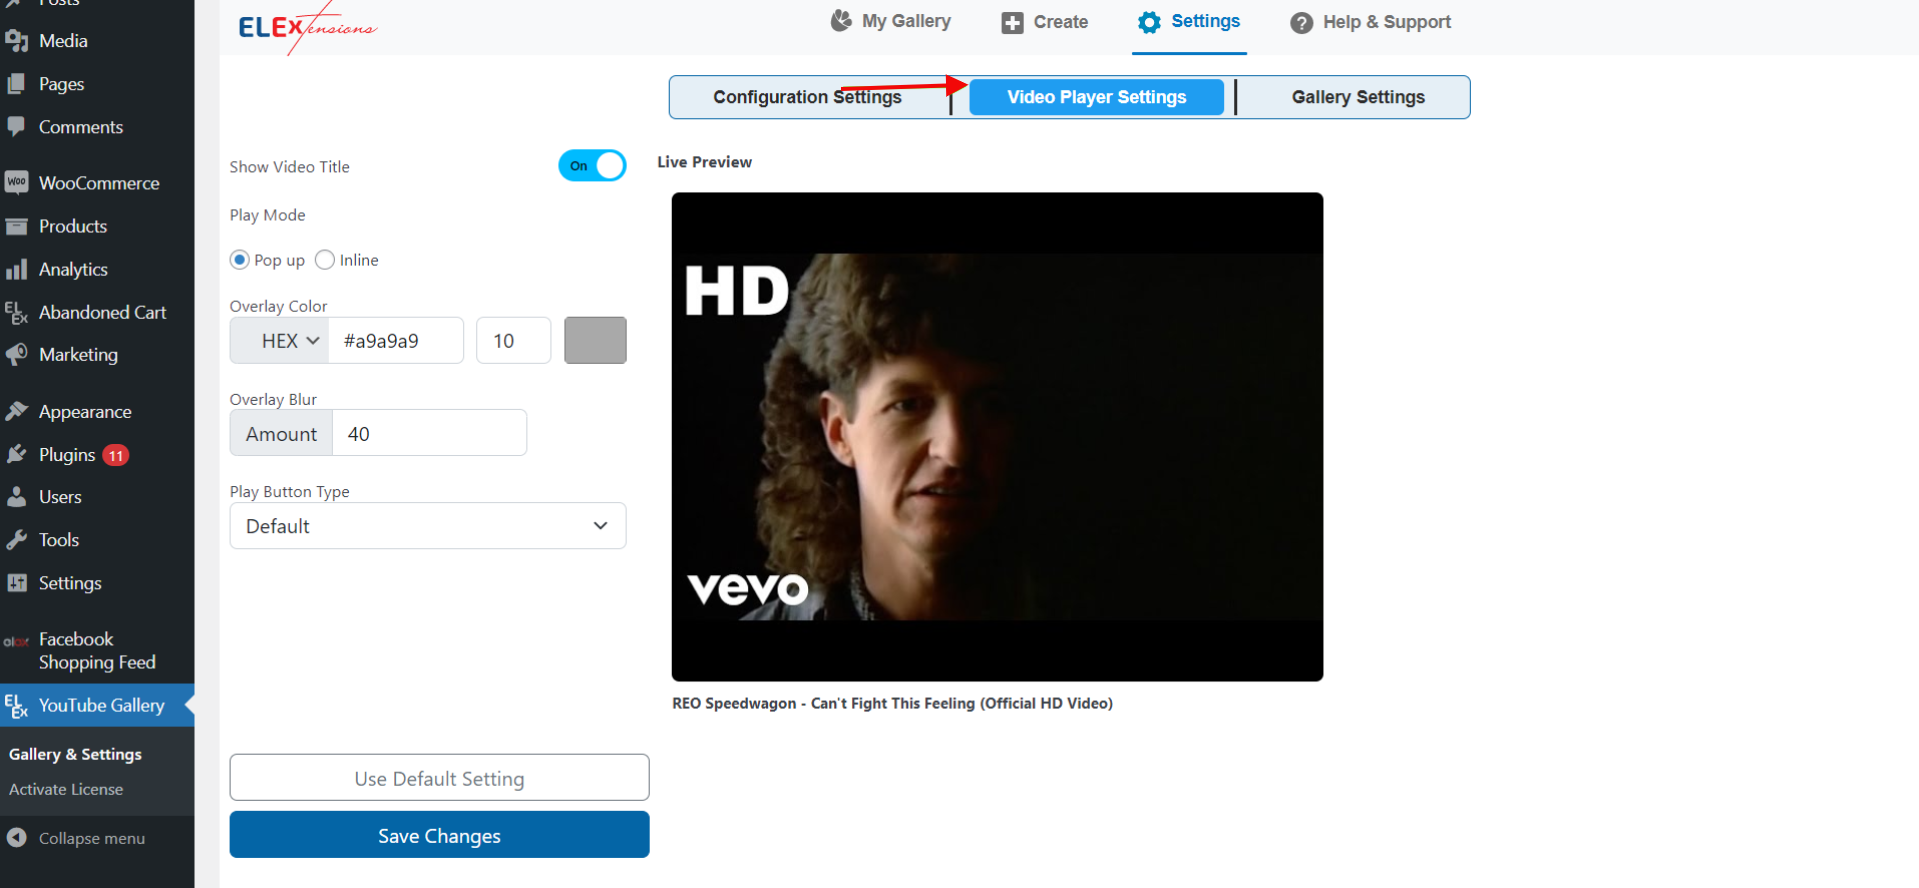 Configure the Video Player Settings